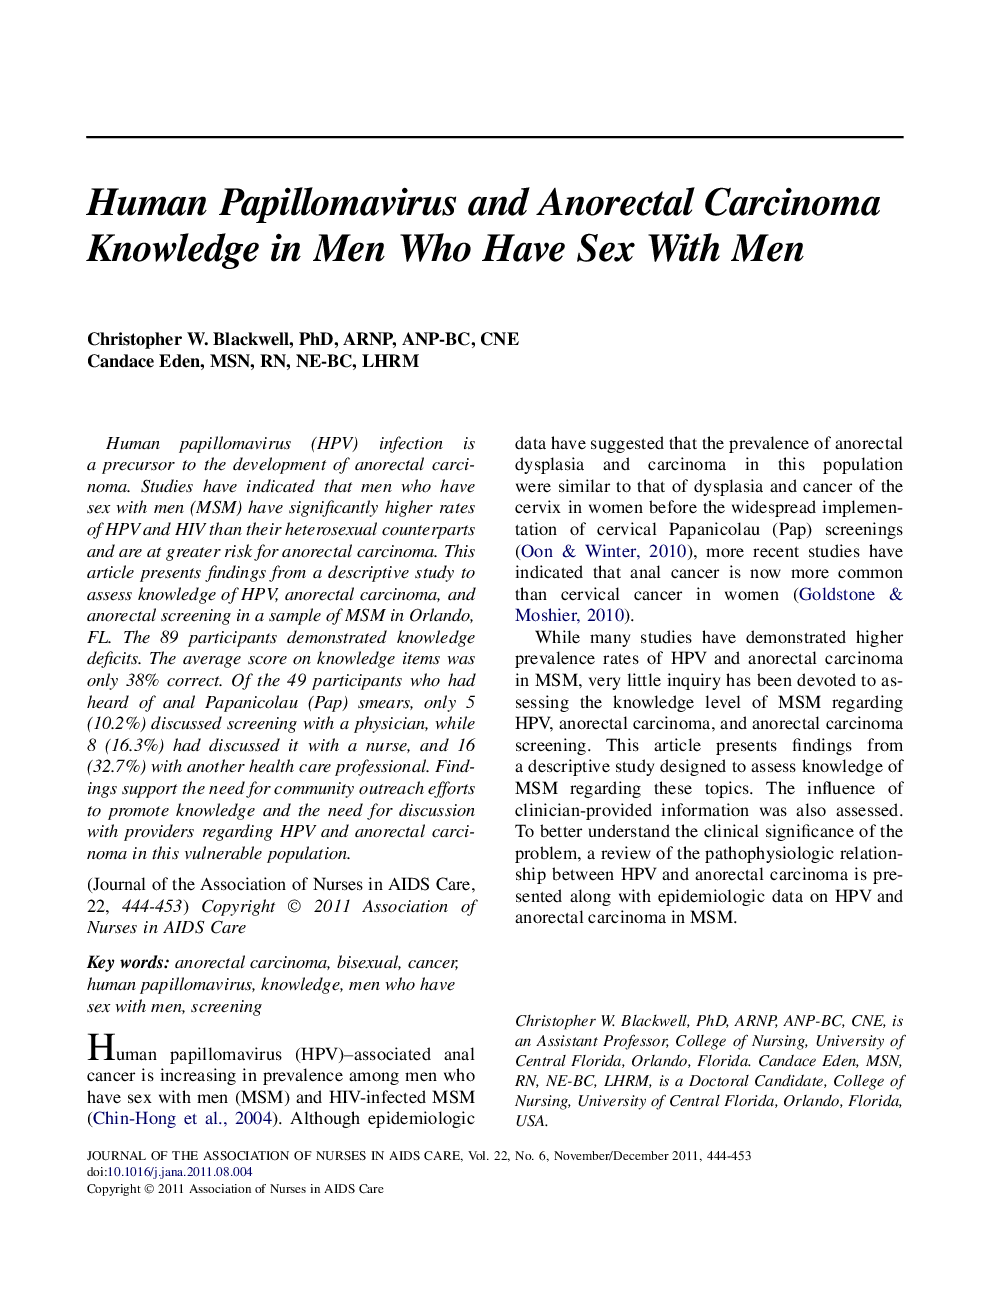 Human Papillomavirus and Anorectal Carcinoma Knowledge in Men Who Have Sex With Men